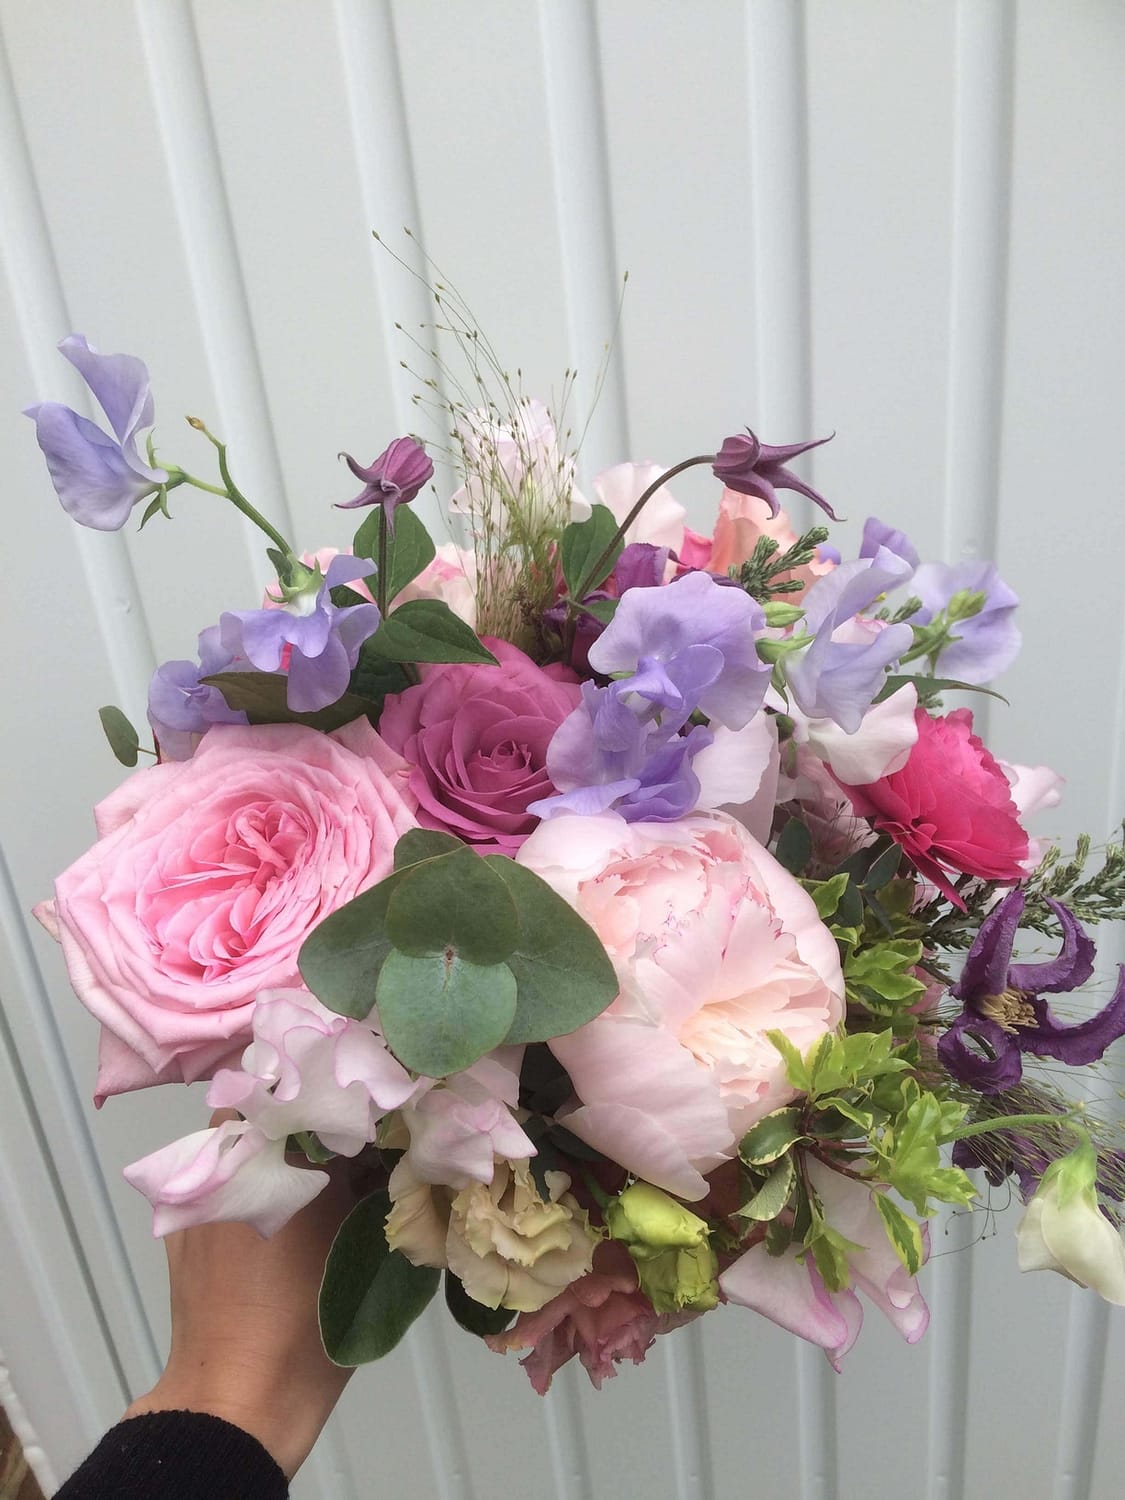 pangdean barn wedding florist, bridal bouquet with sweet peas and peonies